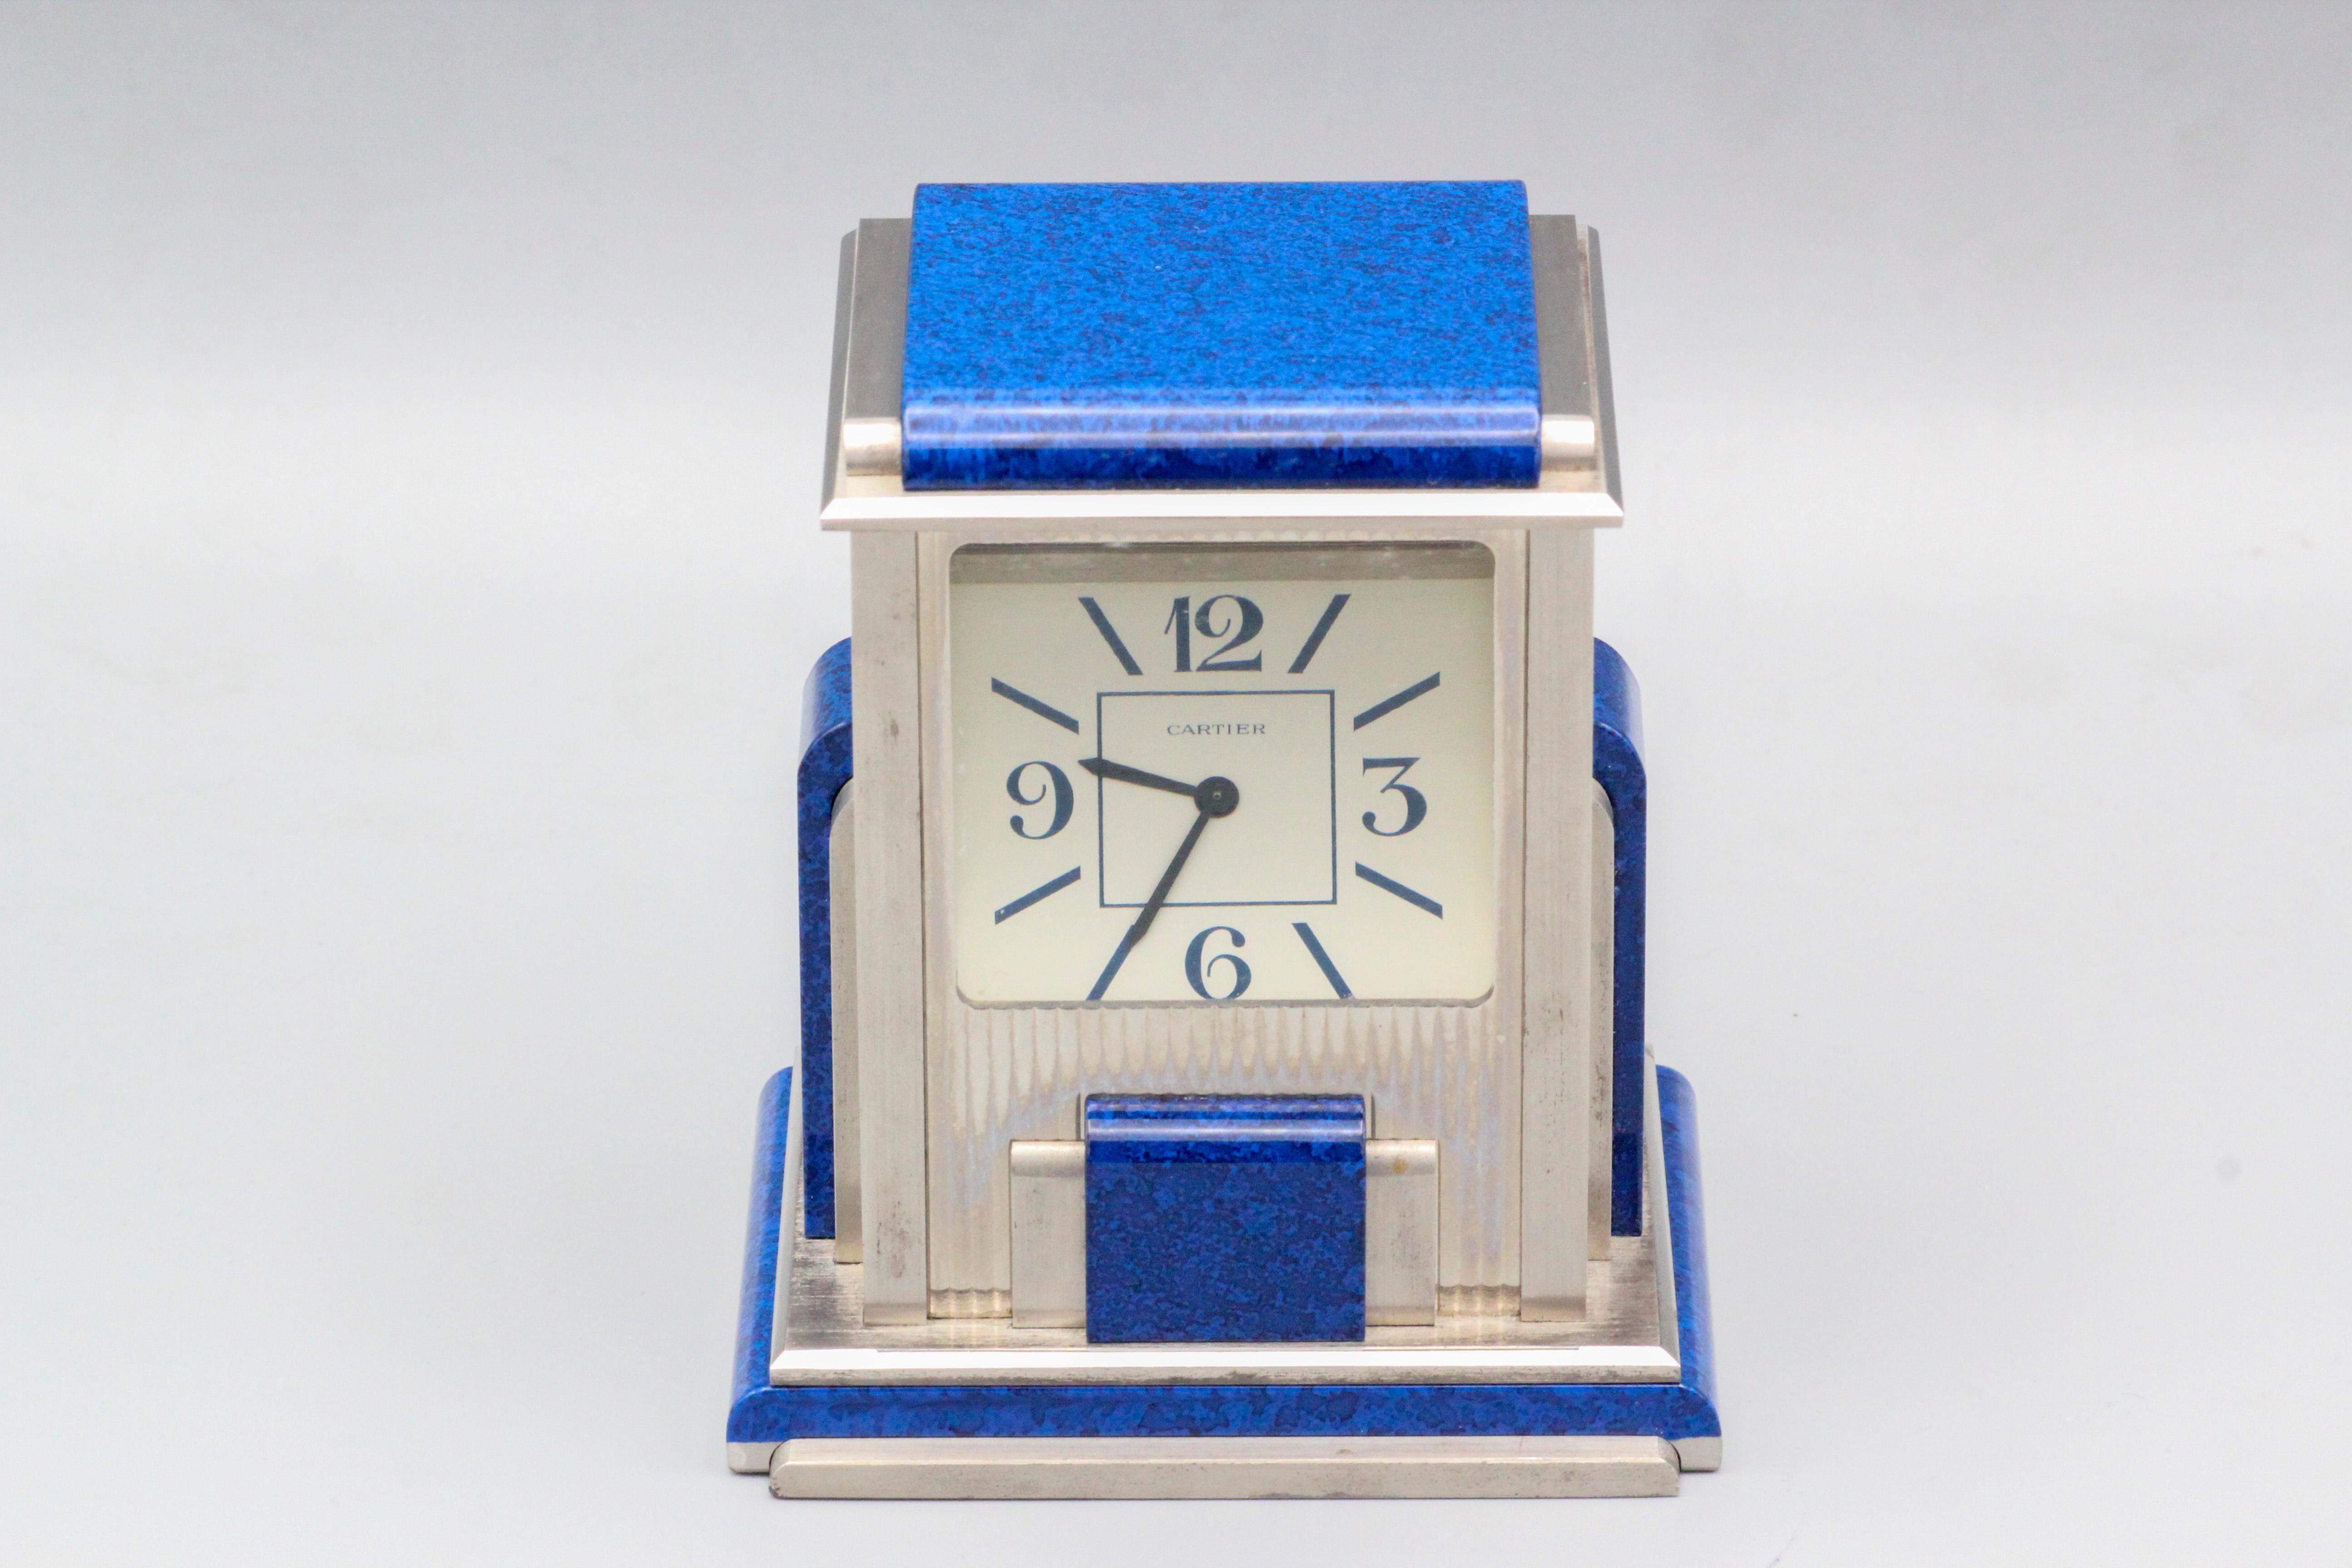 The Cartier Mystery Prism Desk Clock is a testament to the brand's commitment to both horological excellence and artistic design. Cartier, renowned for its luxury timepieces and jewelry, created this desk clock as a distinctive and elegant addition